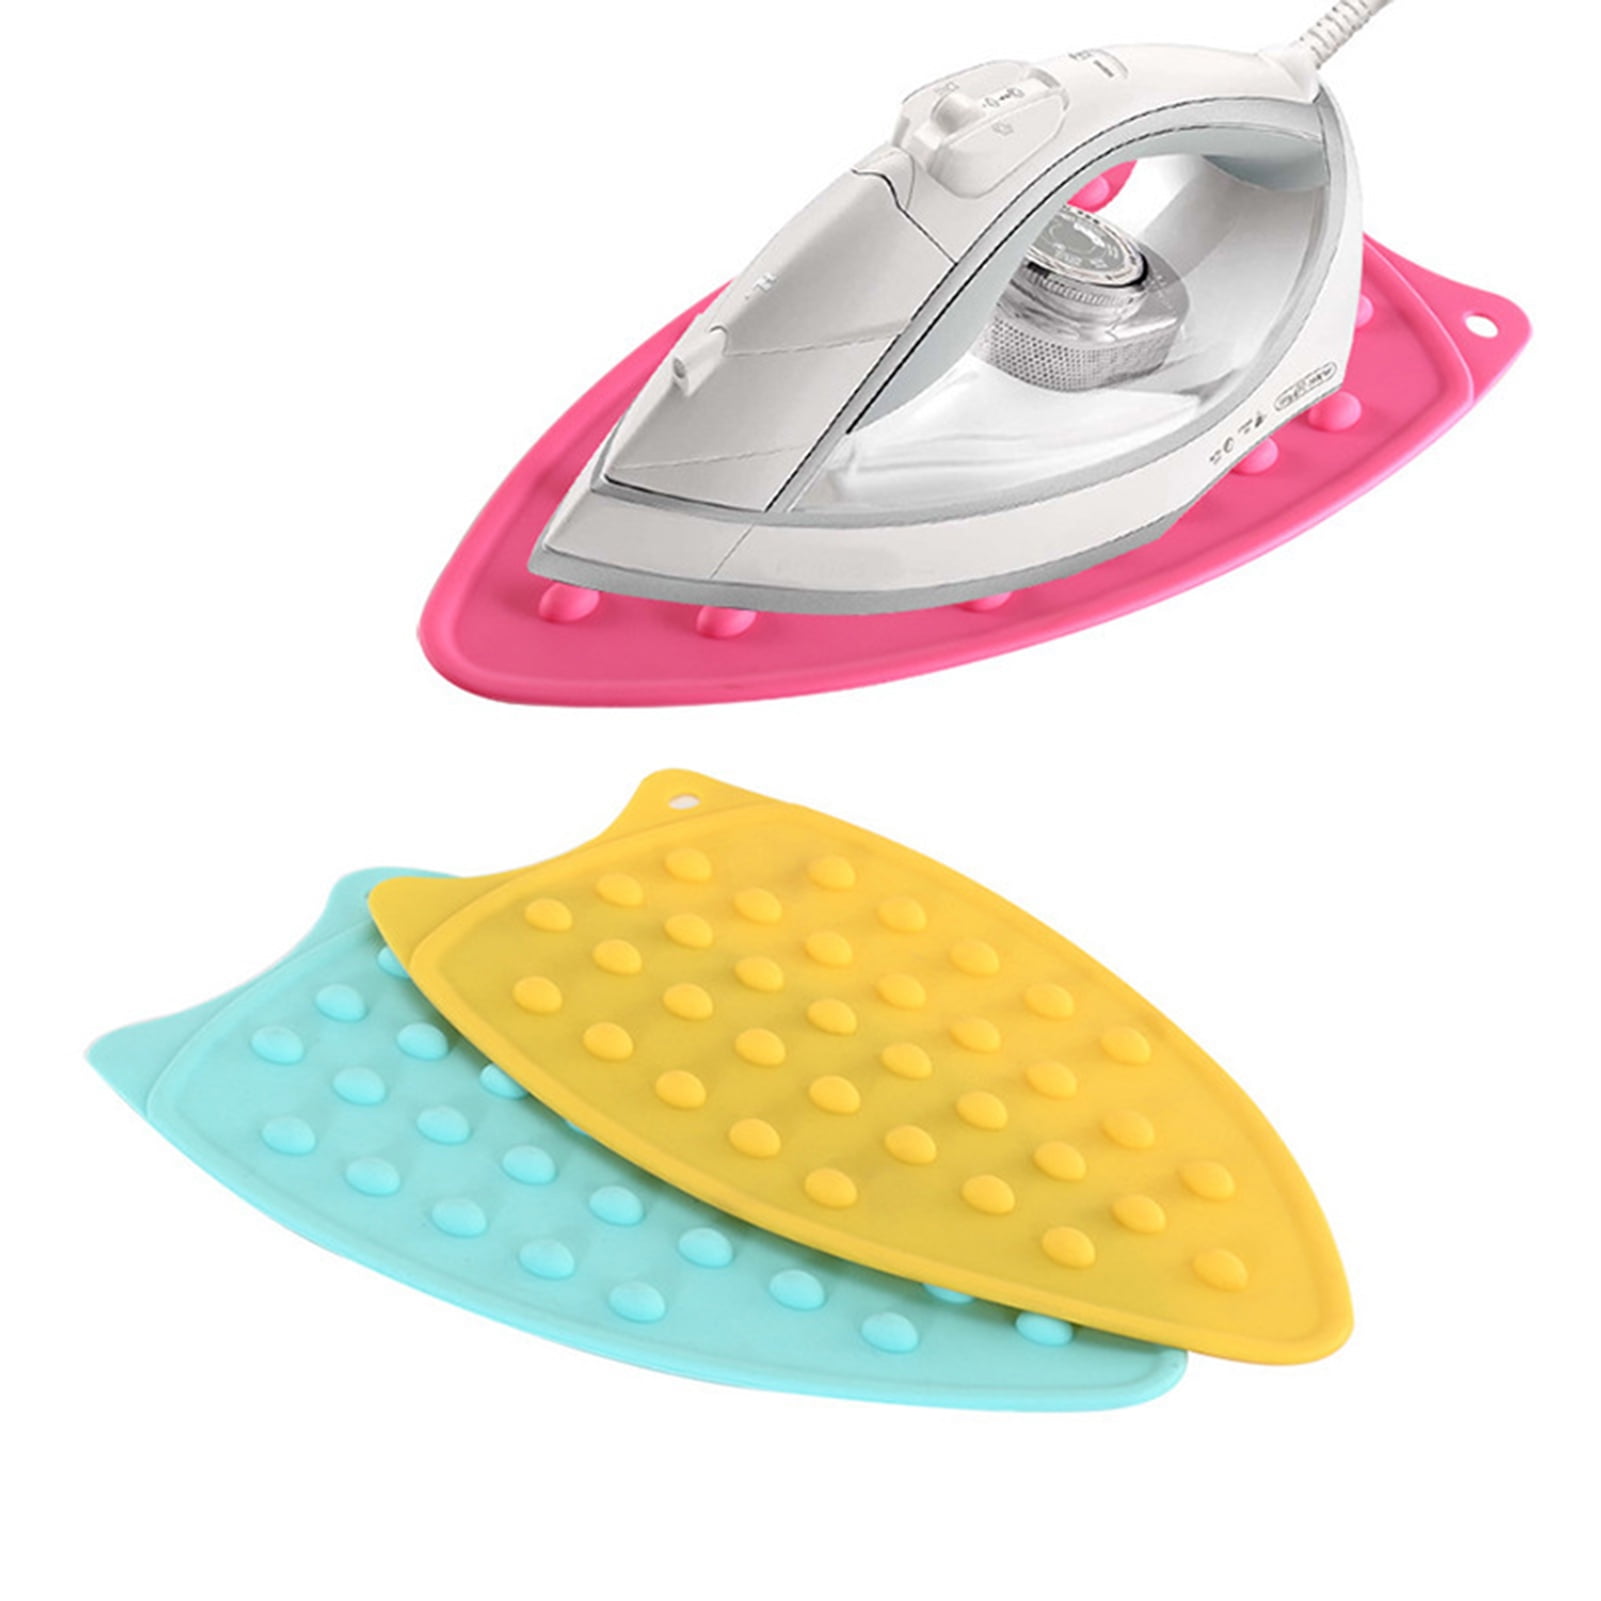 xigua Beach Ironing Mat with Silicone Rest Pad, Foldable Quilted